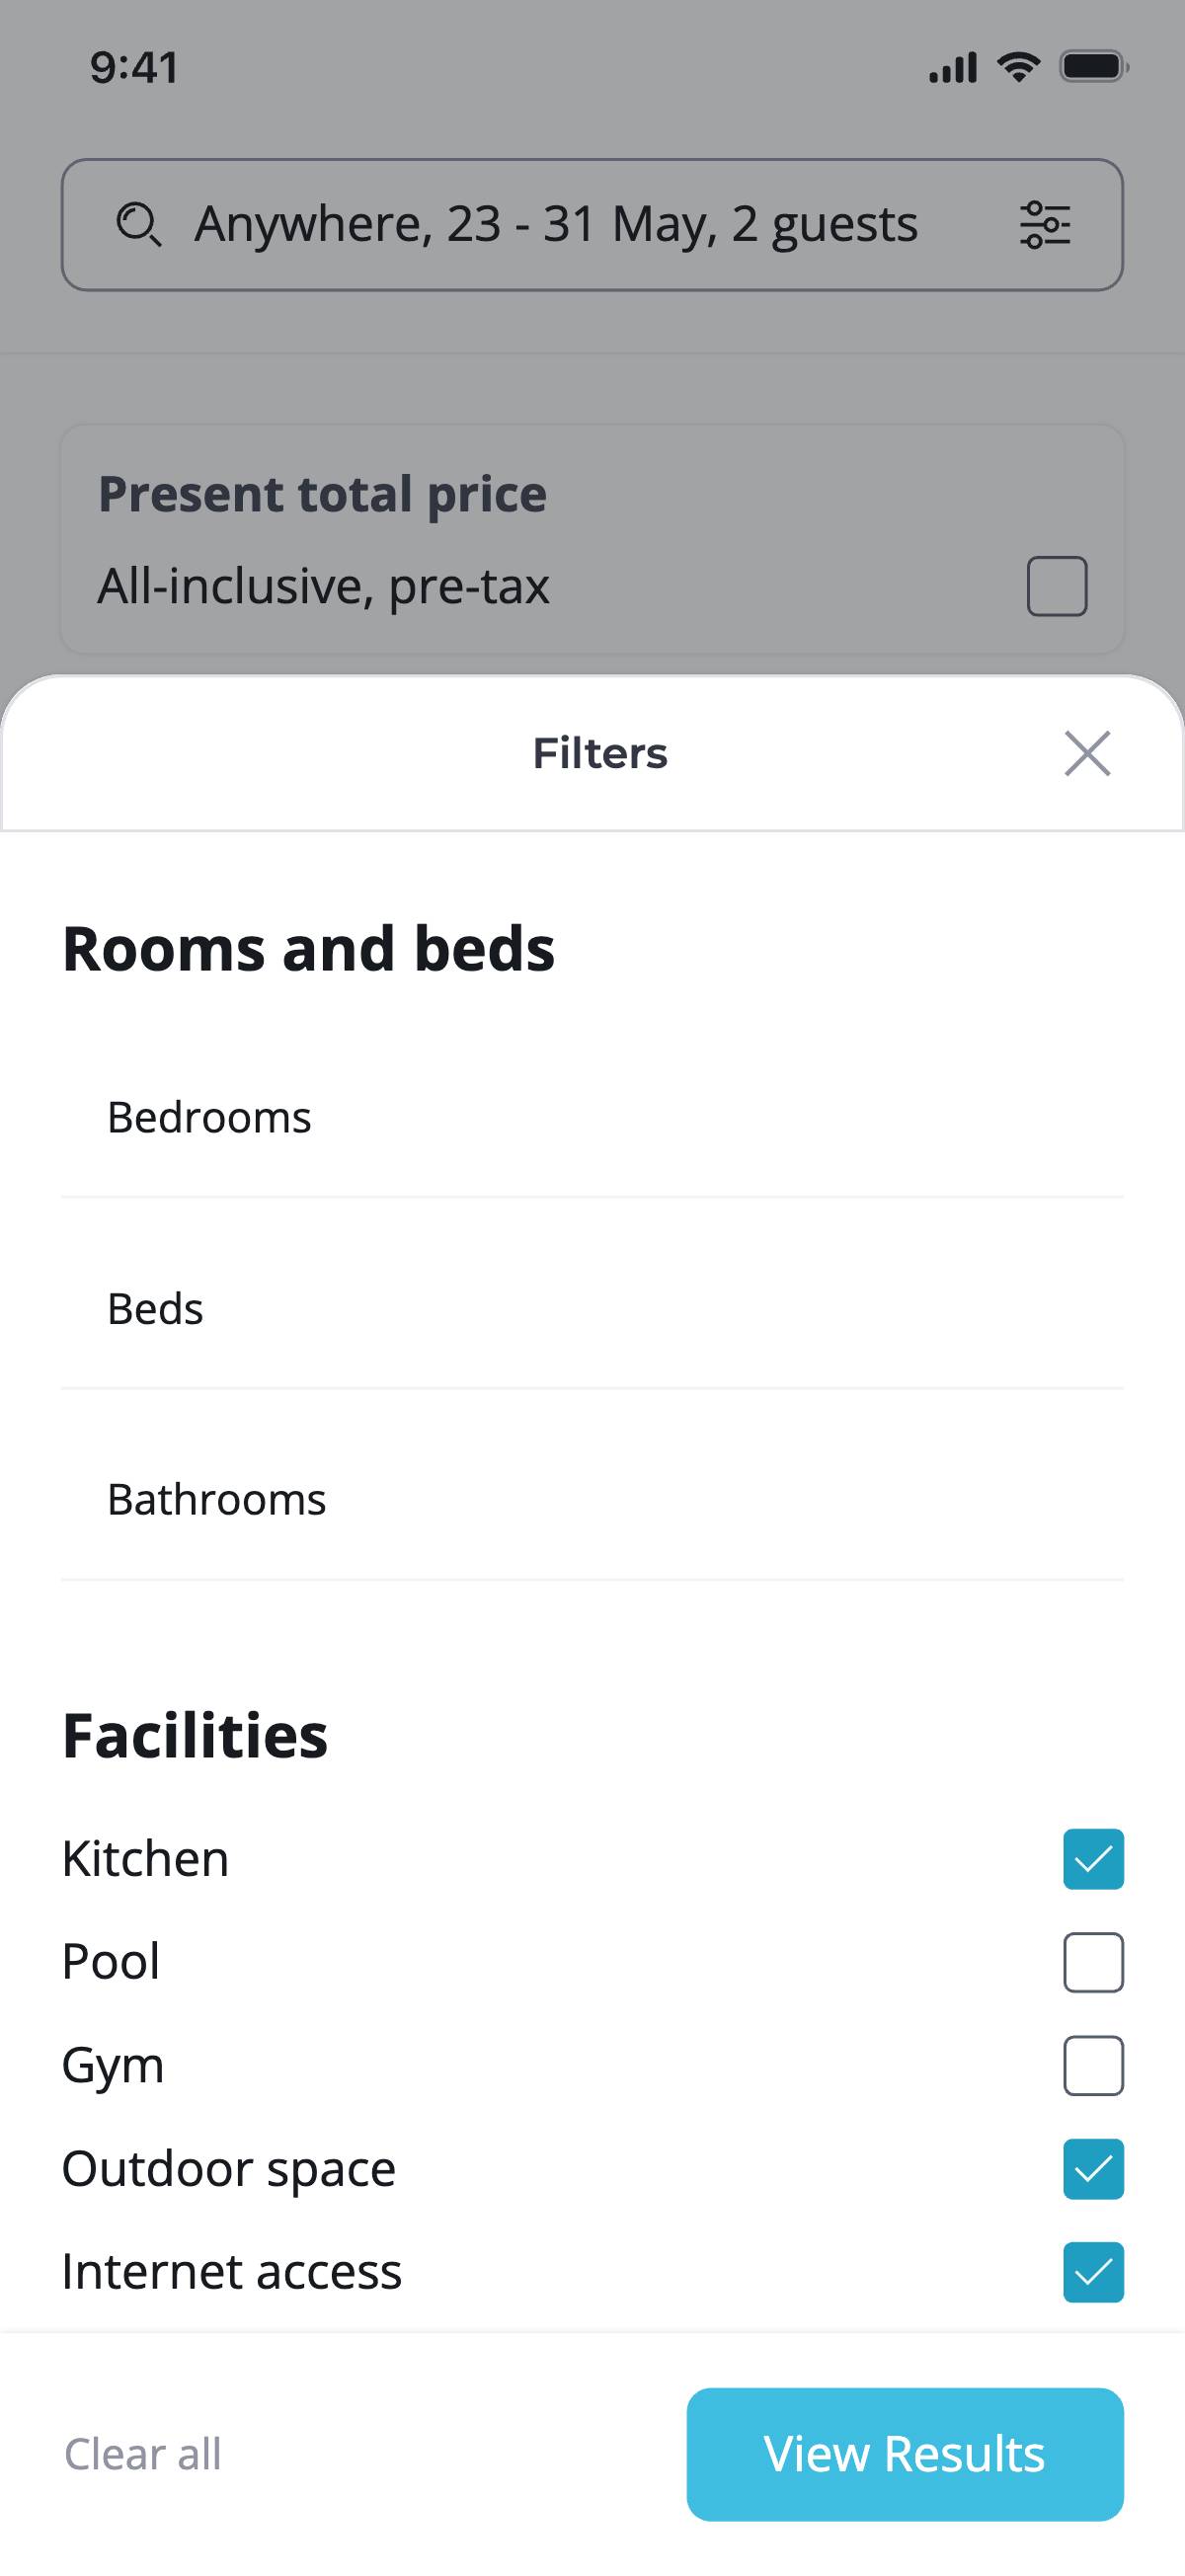 Filters of results  - Facilities